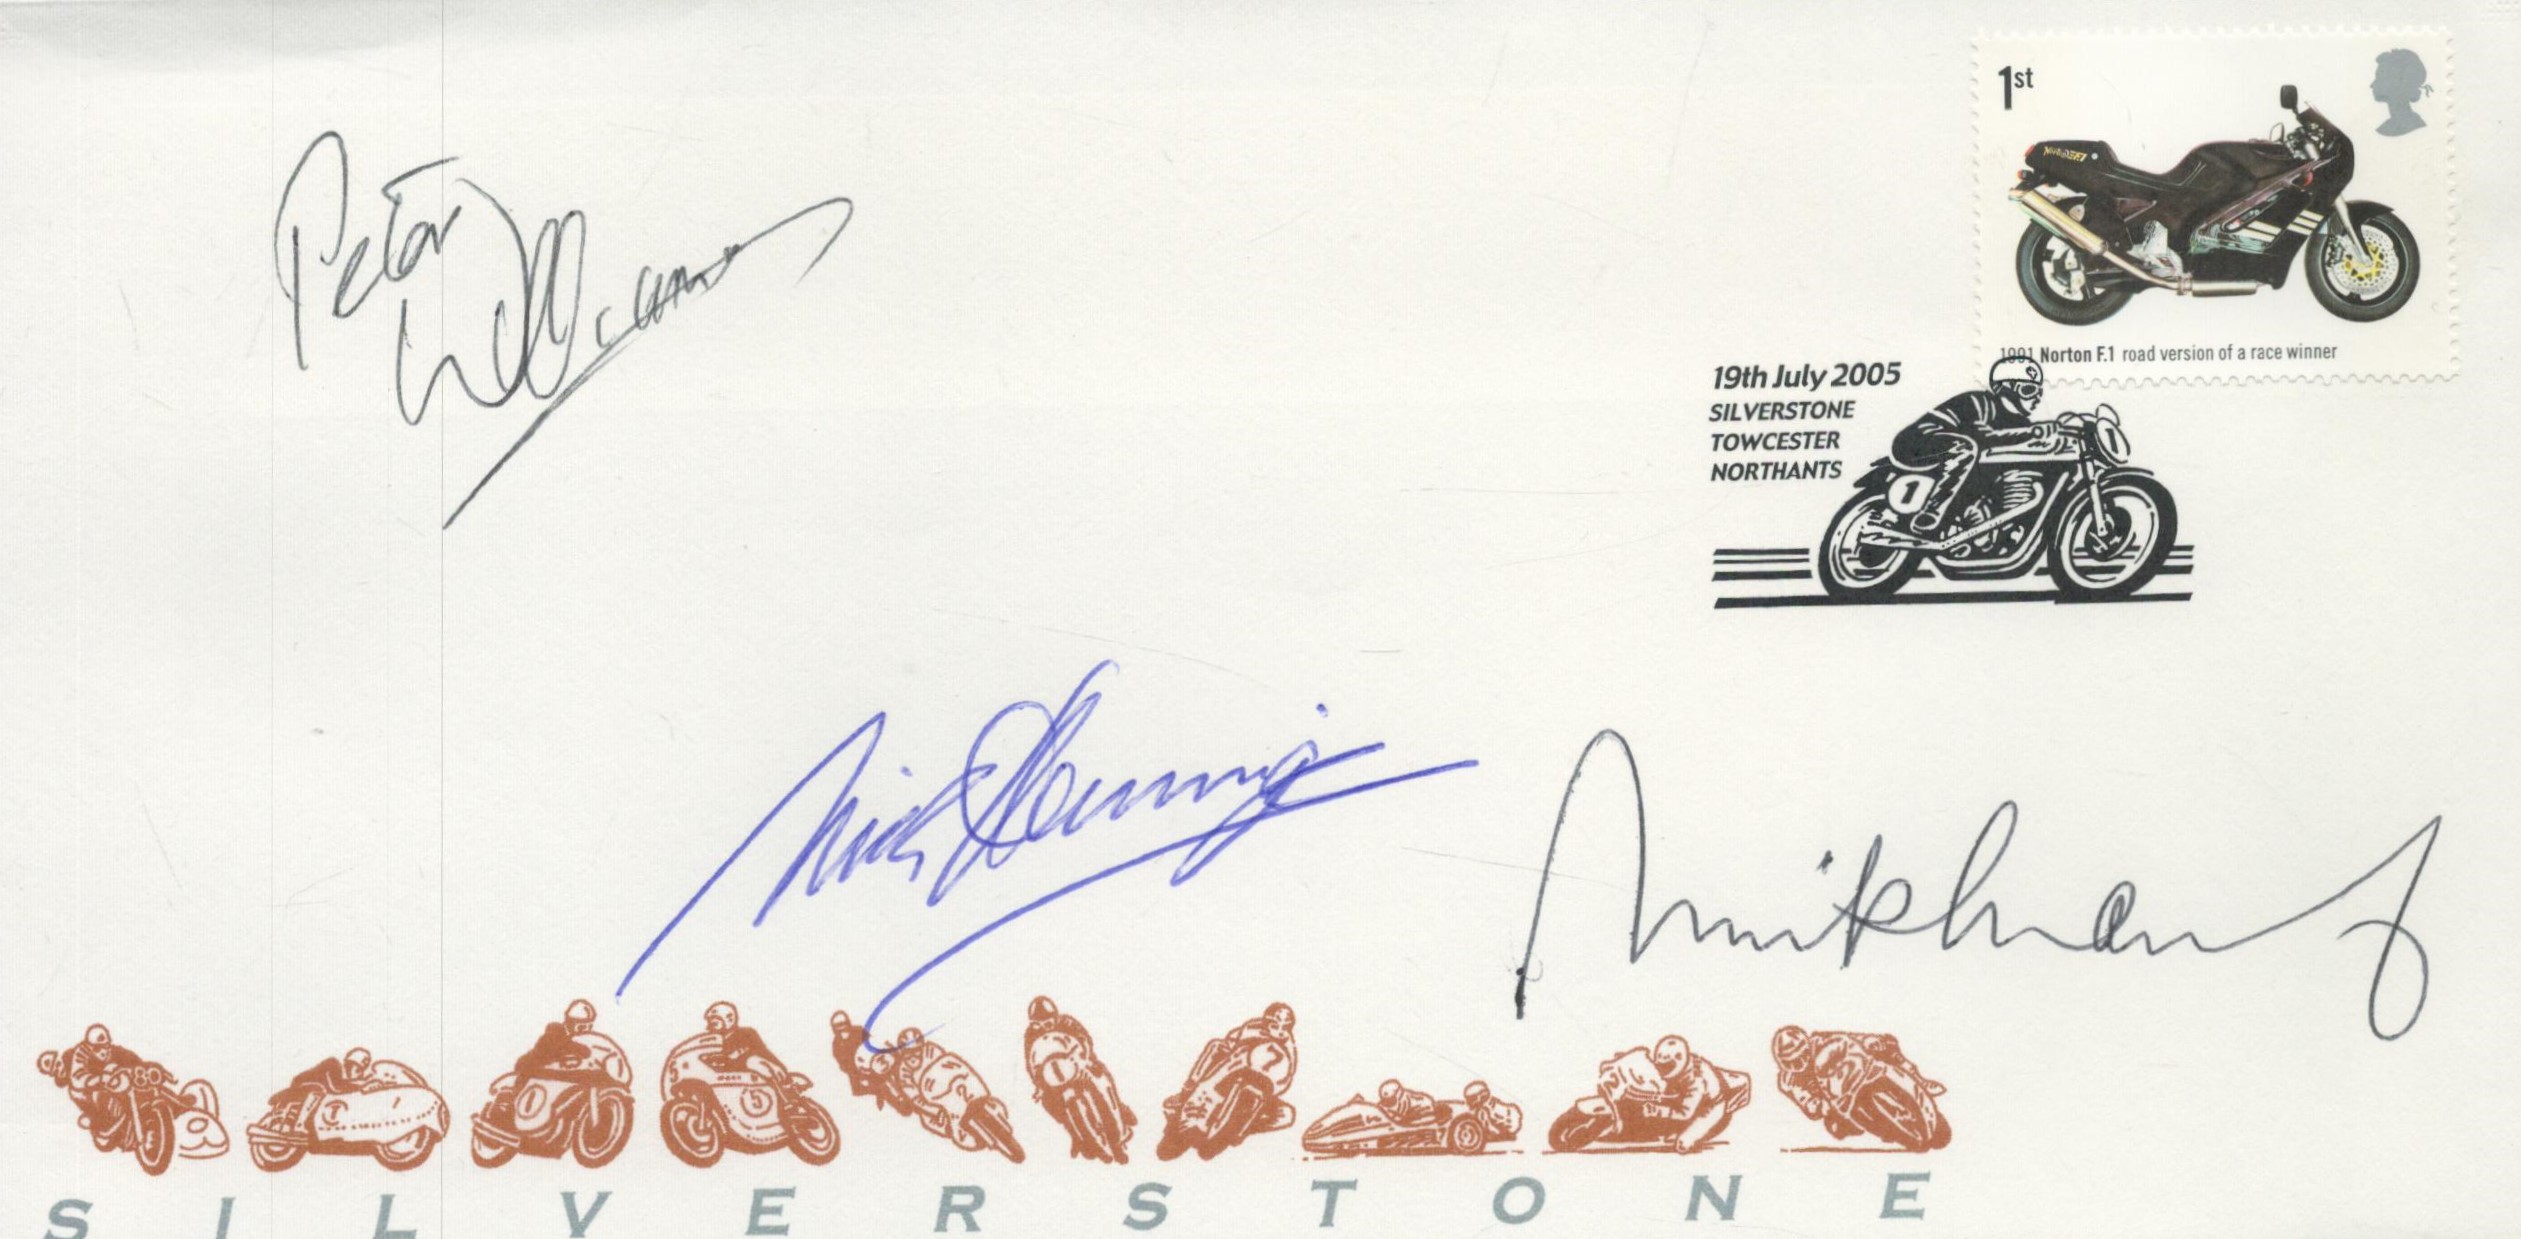 Motor Cycle race legends 2005 Silverstone Cover signed Mick Grant, Williams and Hemmings. Numbered